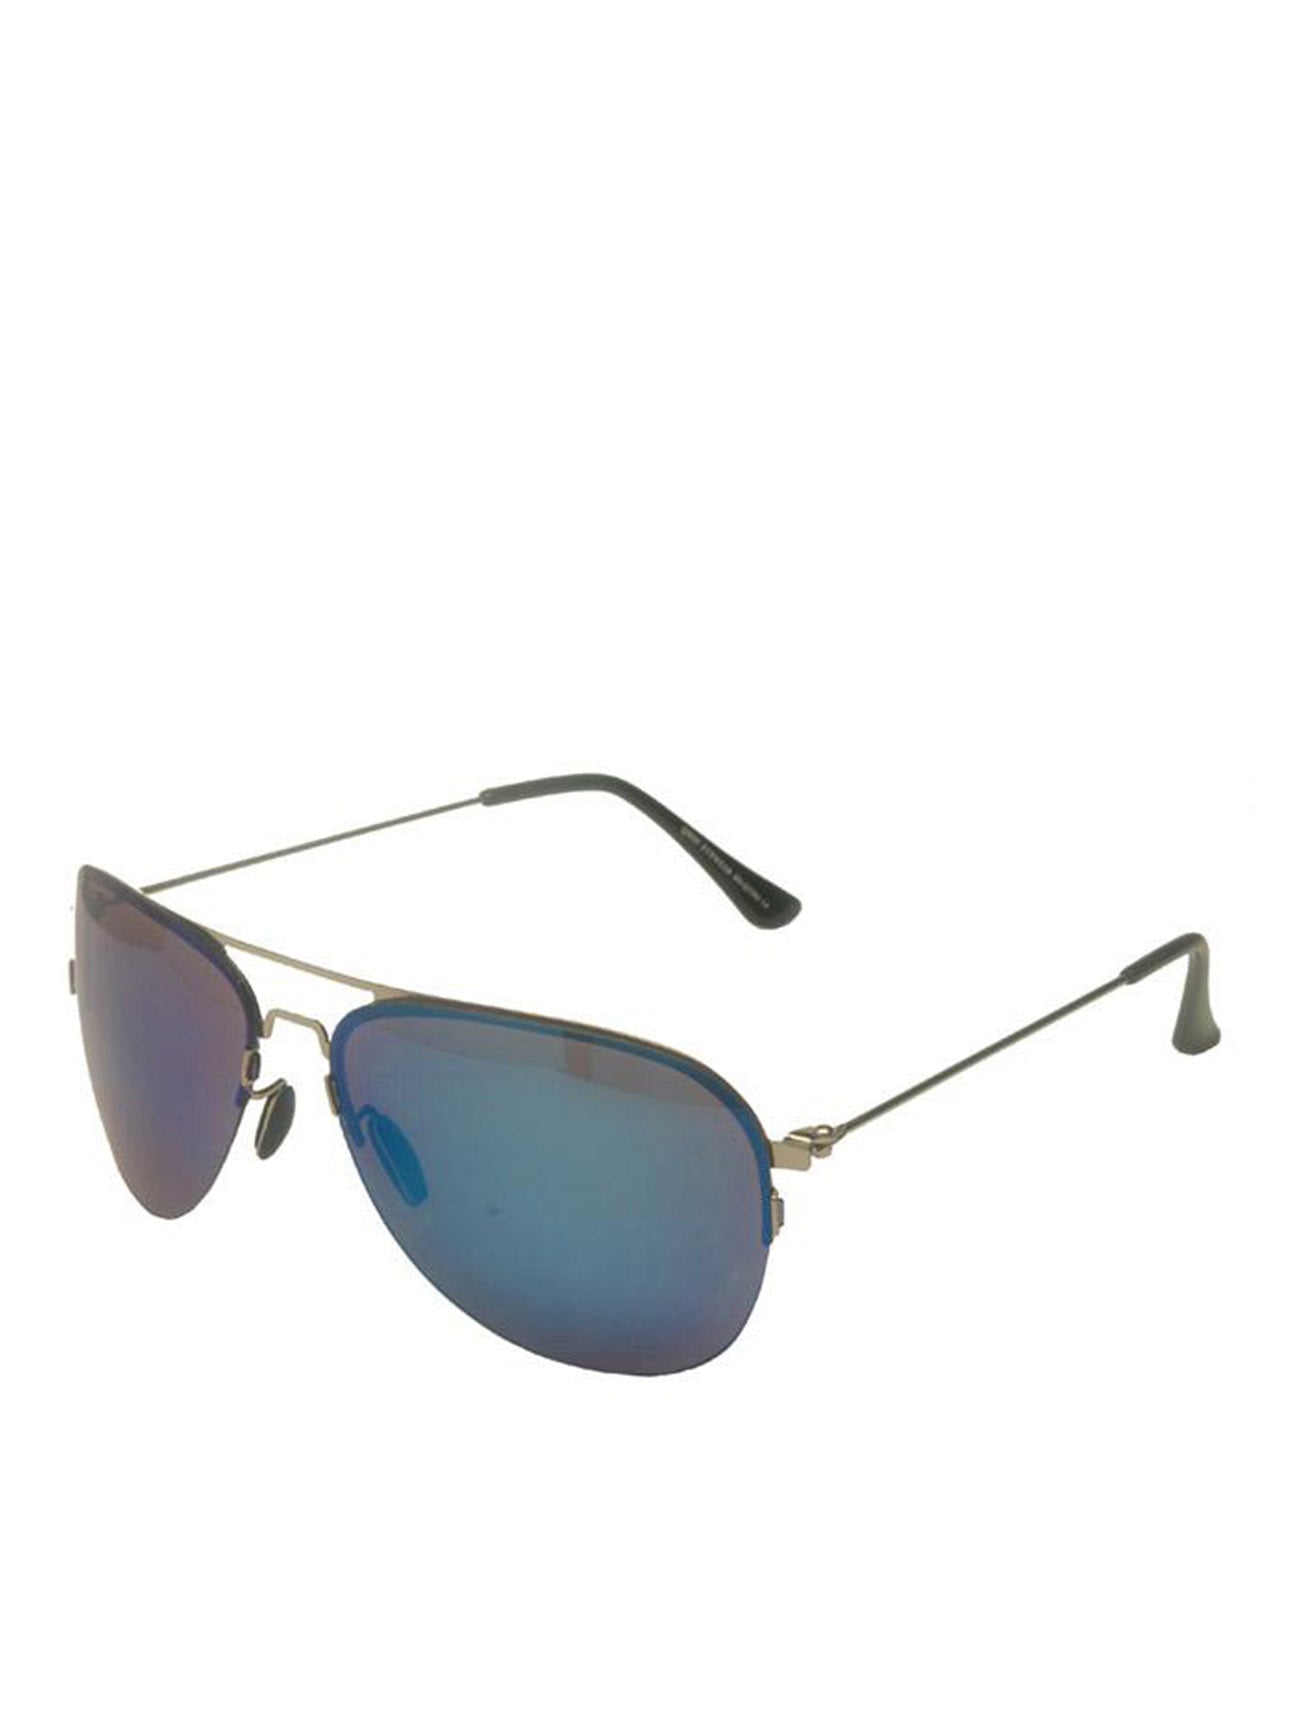 Silver Aviator Sunglasses with Blue Mirrored Lenses